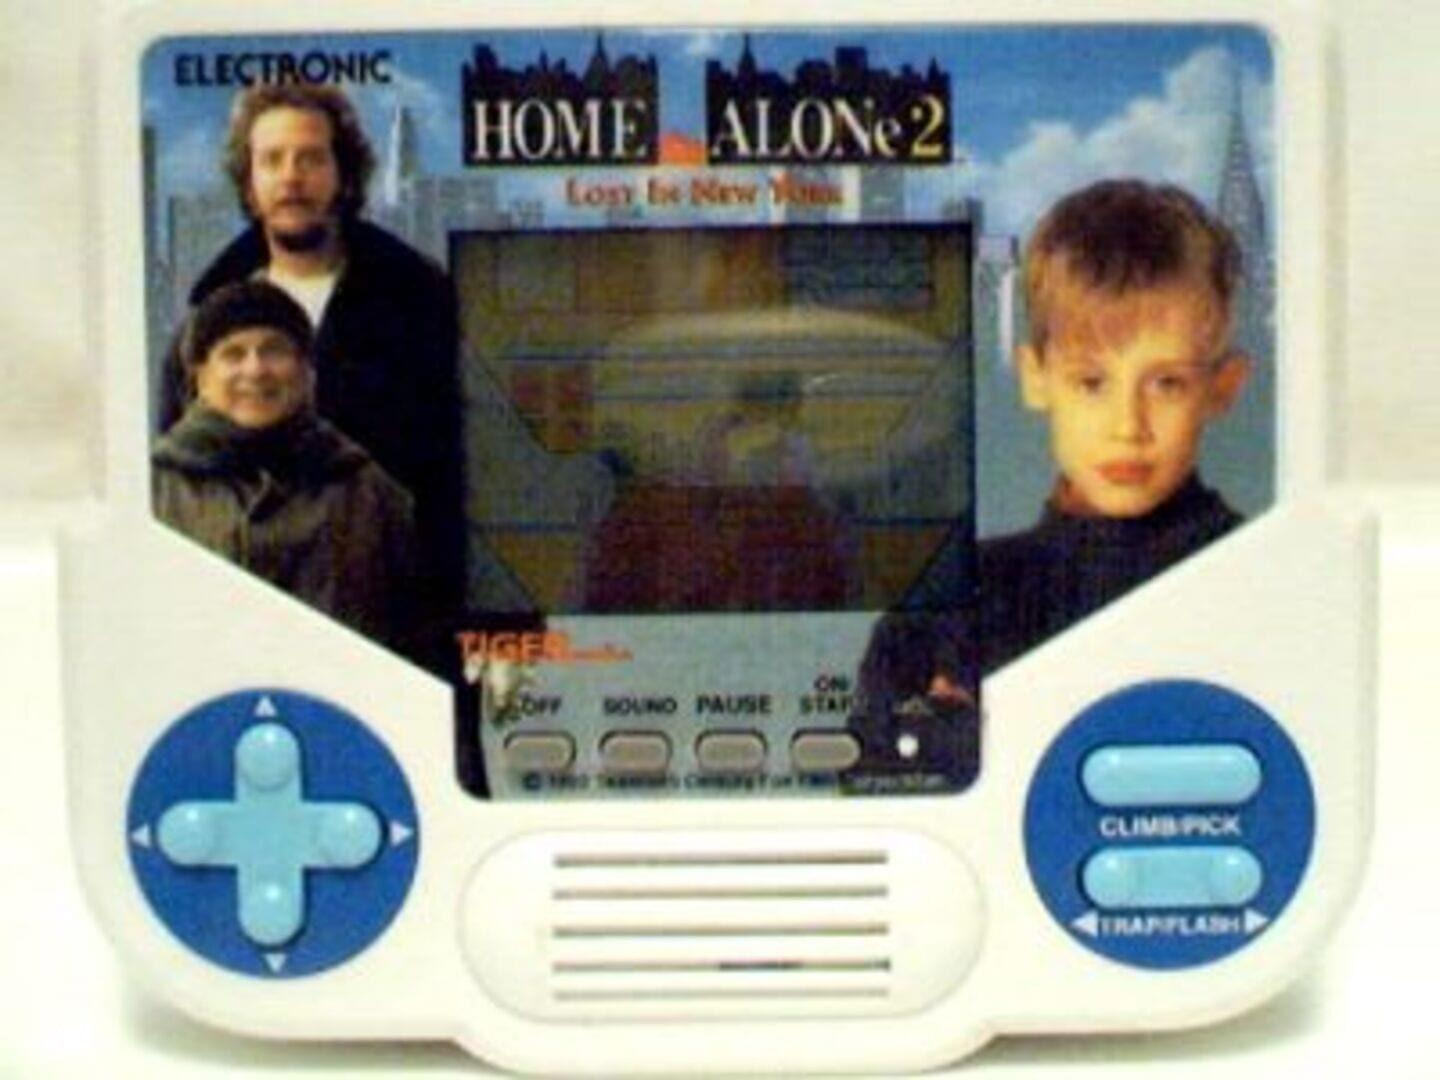 Home Alone 2: Lost in New York cover art